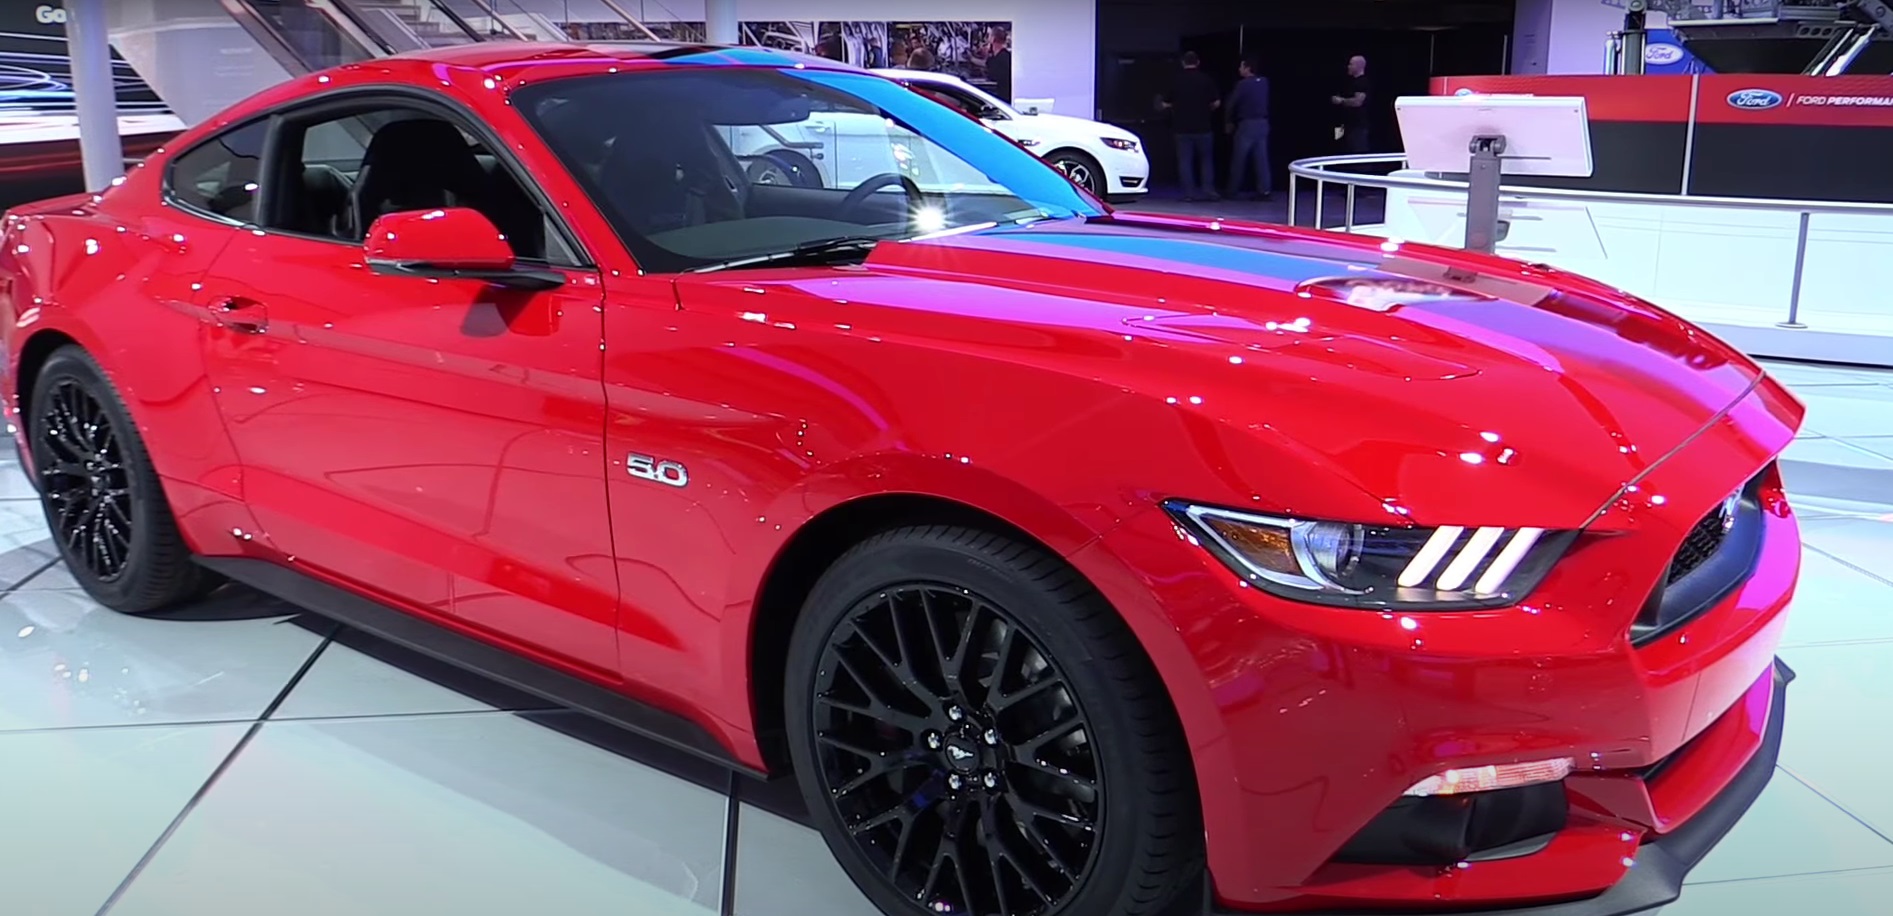 Video: 2017 Ford Mustang GT Premium Coupe - Exterior and Interior Walkaround